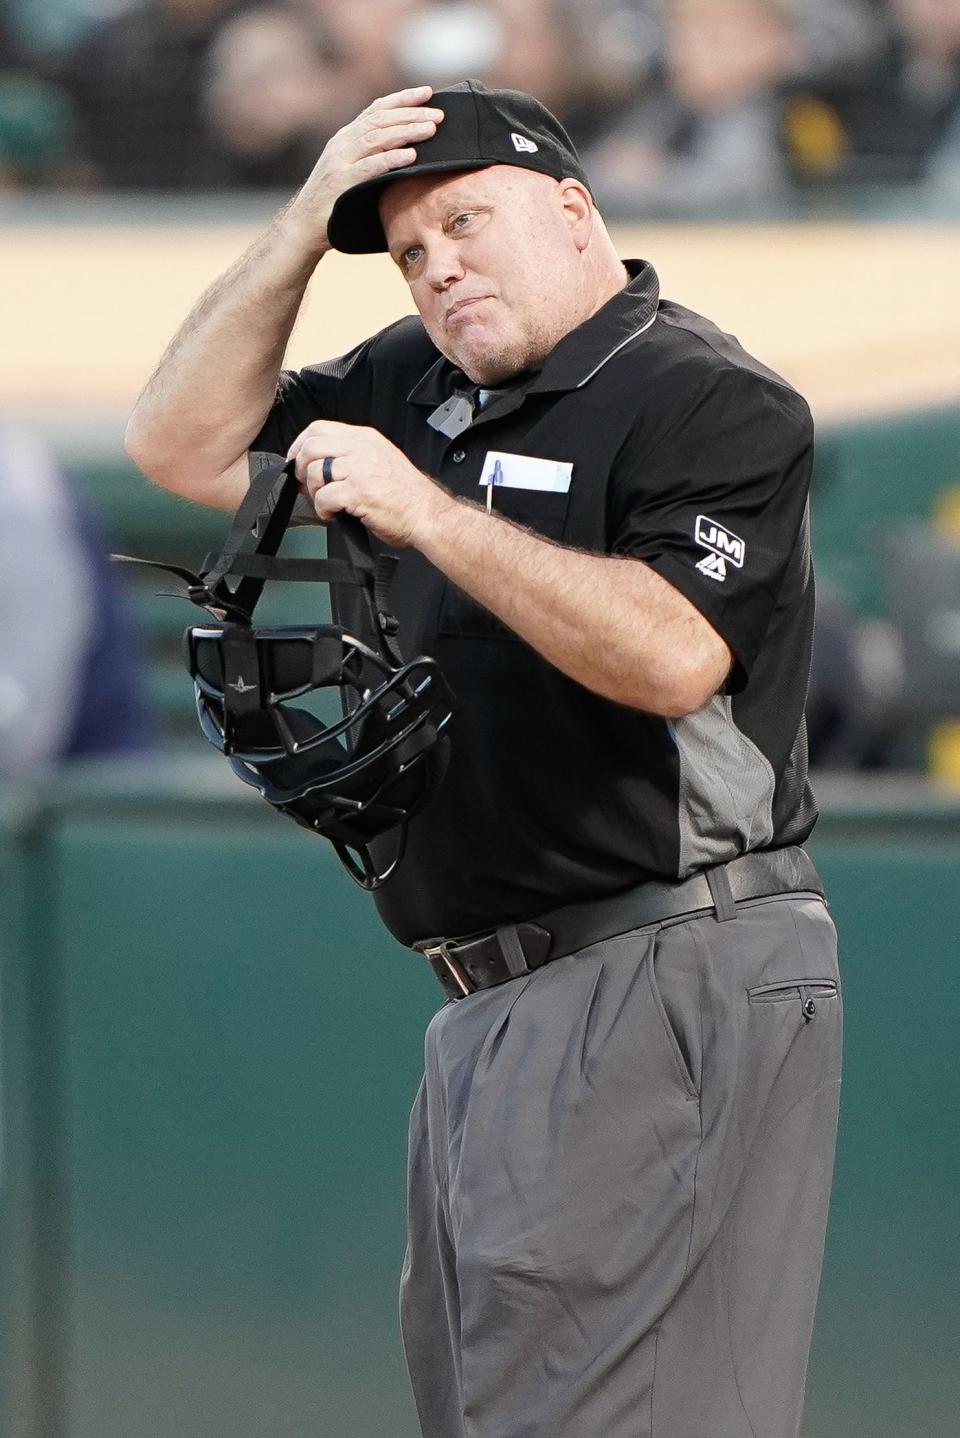 Umpire Brian O'Nora during a game between the Seattle Mariners and Oakland Athletics at the Oakland Coliseum in 2019.